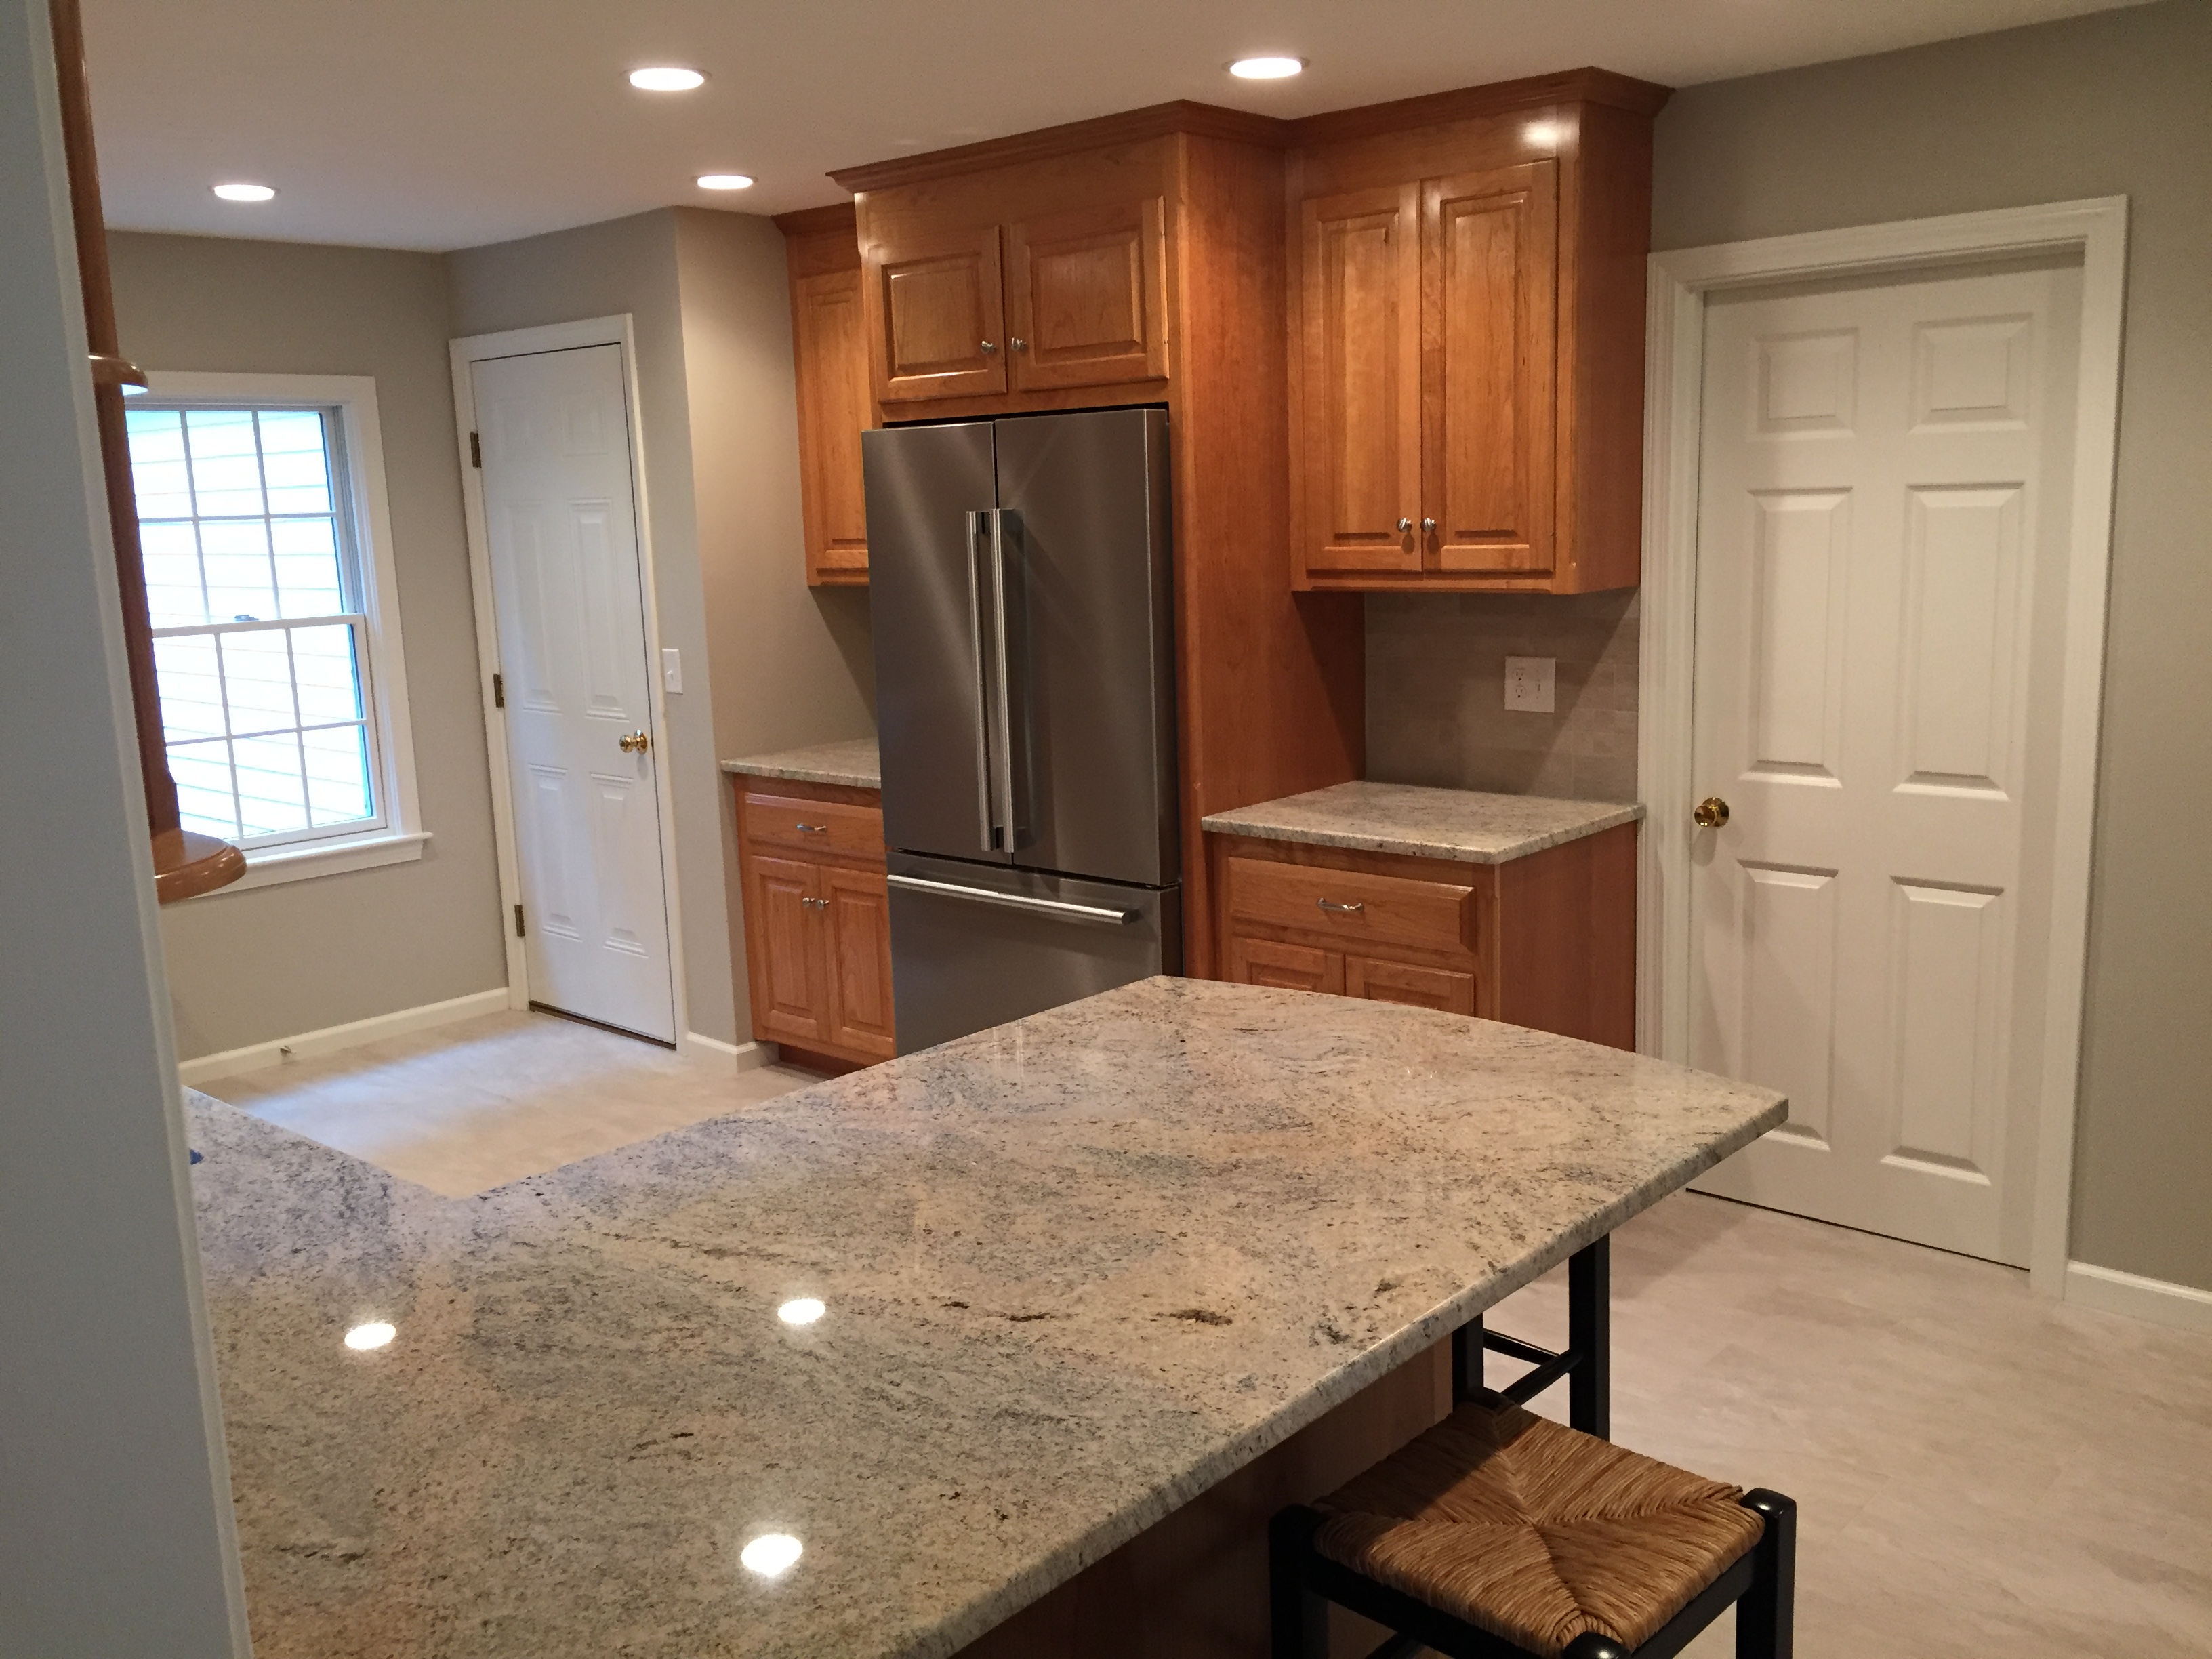 Kitchen w/ Wood Cabinets, Stainless Appliances and Granite Countertops